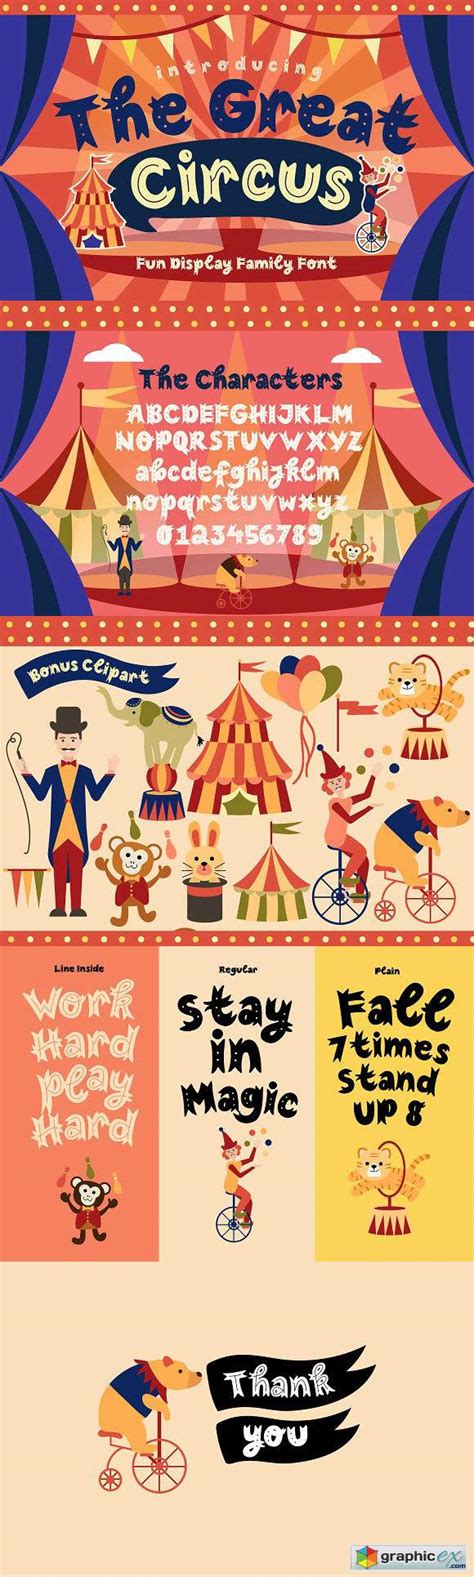 The Great Circus Free Download Vector Stock Image Photoshop Icon